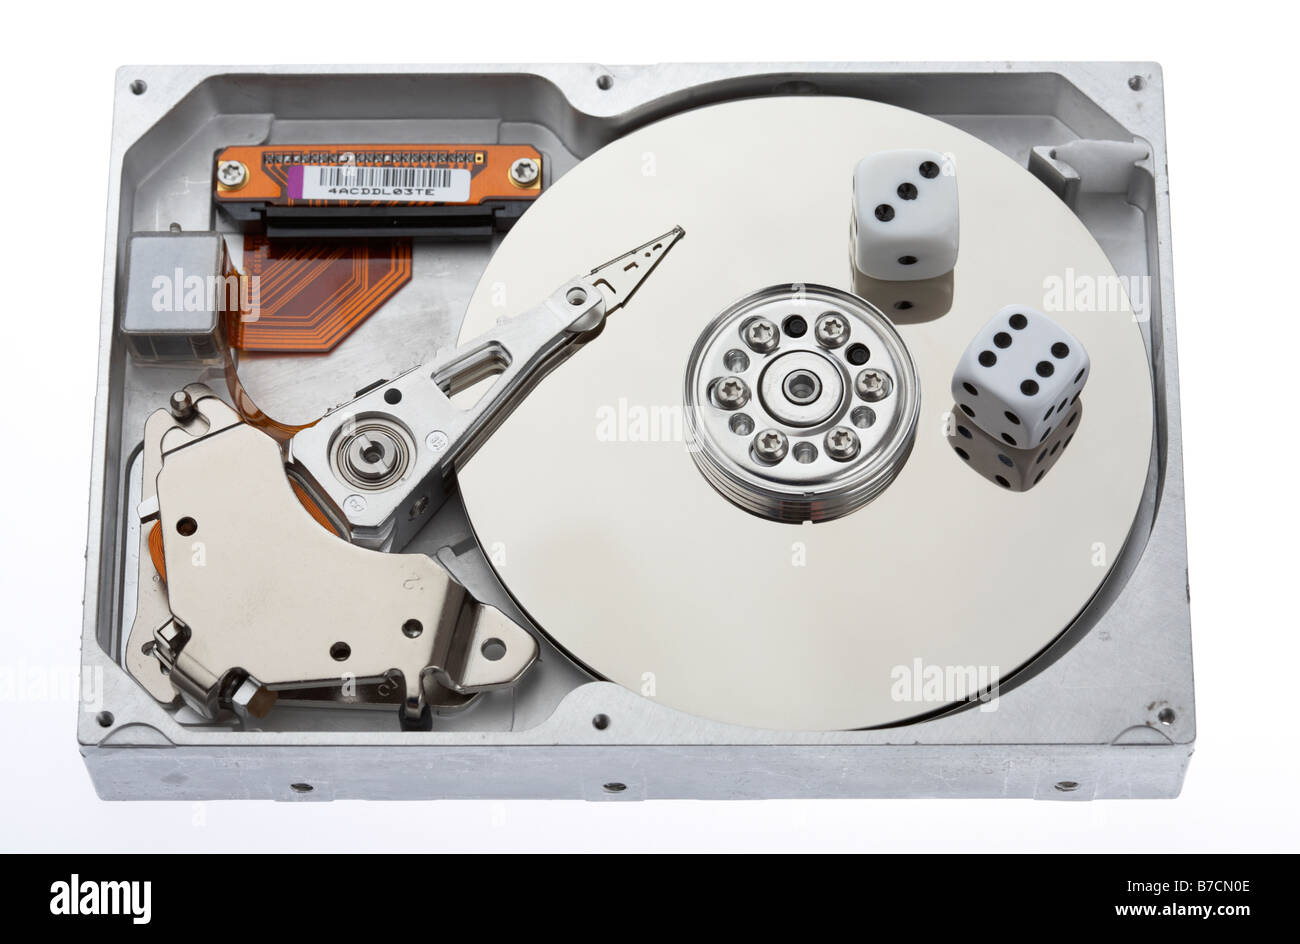 pair of dice sitting on the open platter of a computer hard drive Stock Photo